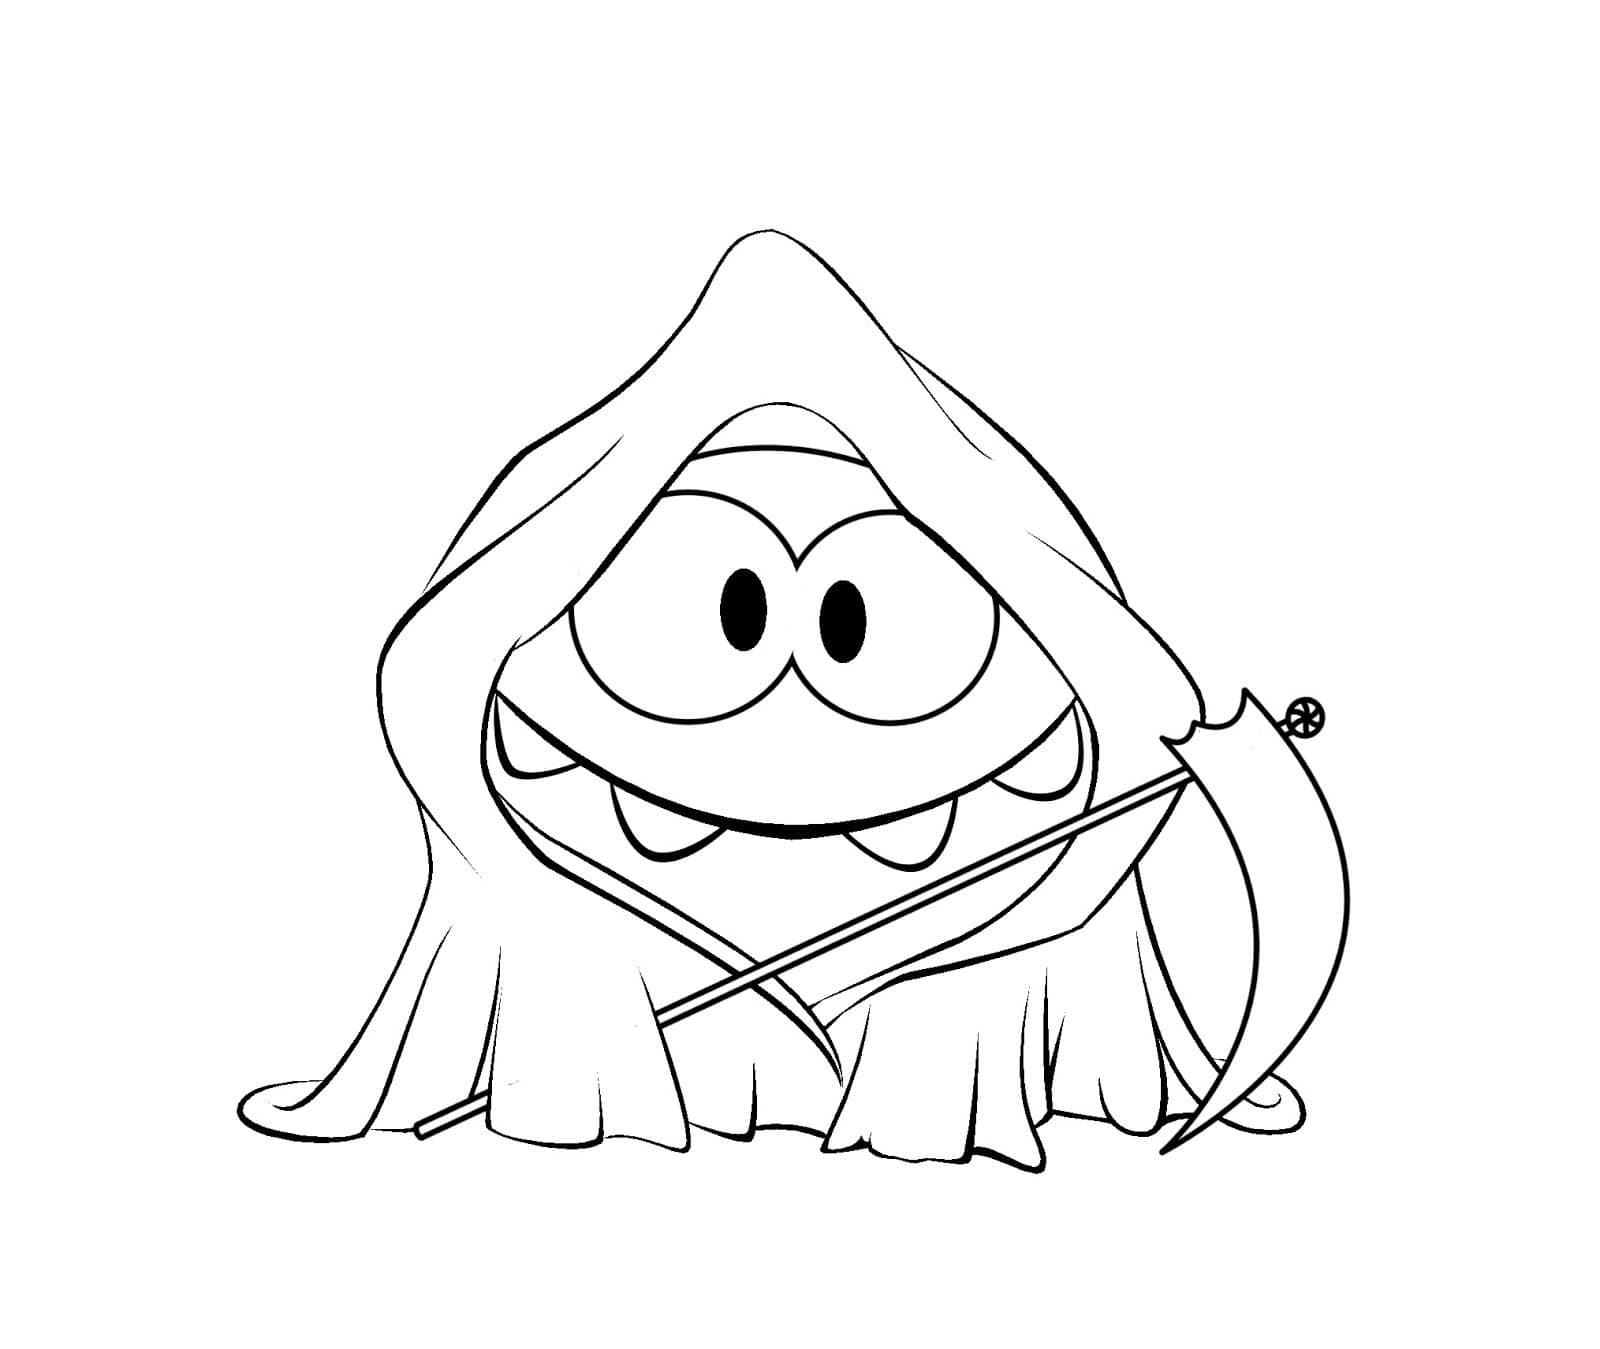 Om Nom Ghost Coloring Page - Free Printable Coloring Pages for Kids